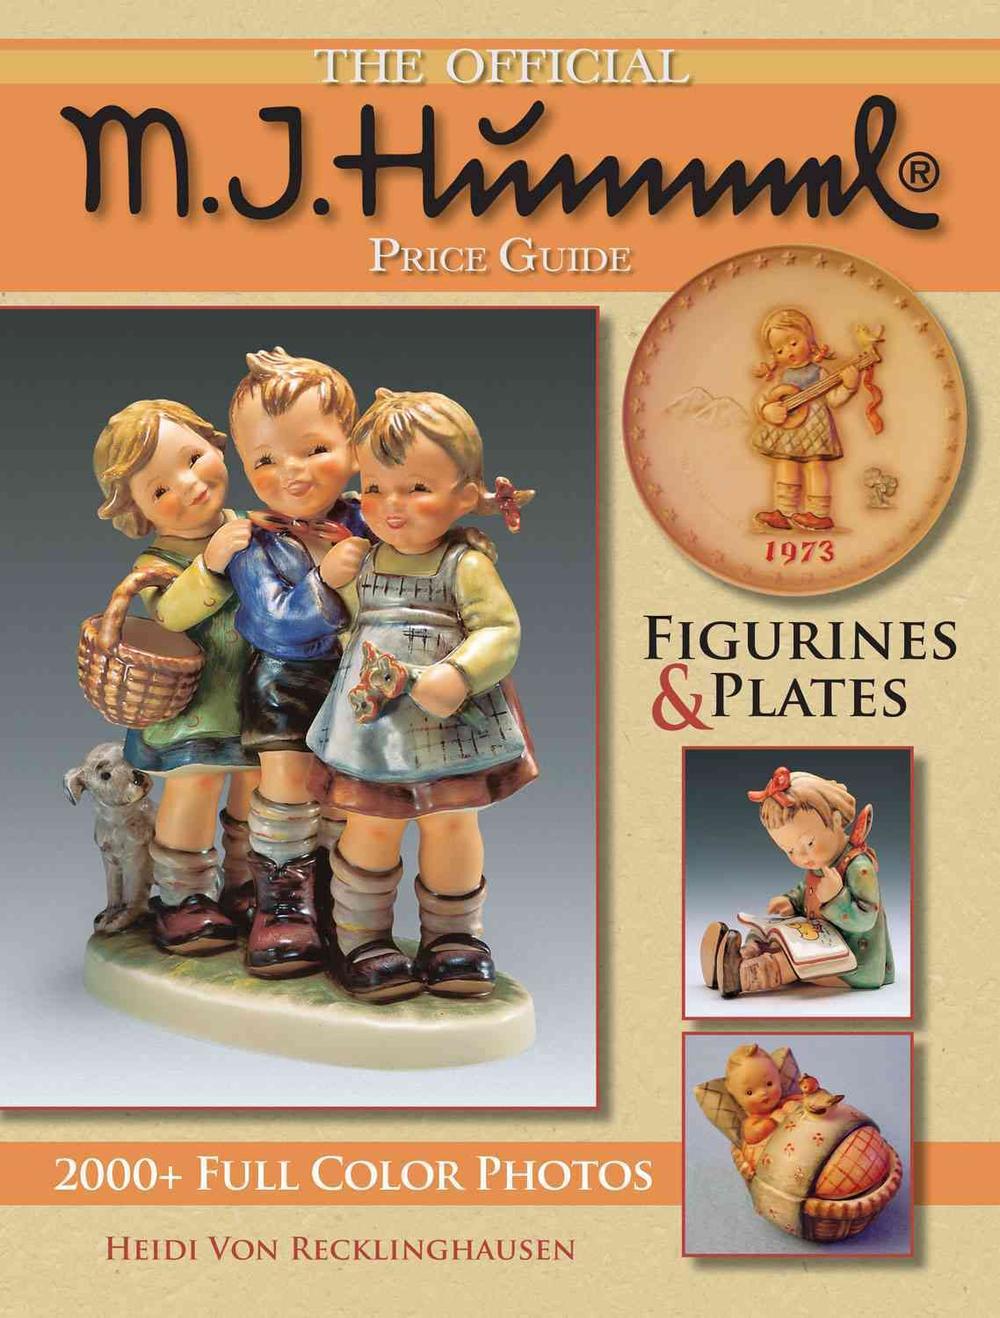 The Official M.J. Hummel Price Guide Figurines & Plates by Heidi Von